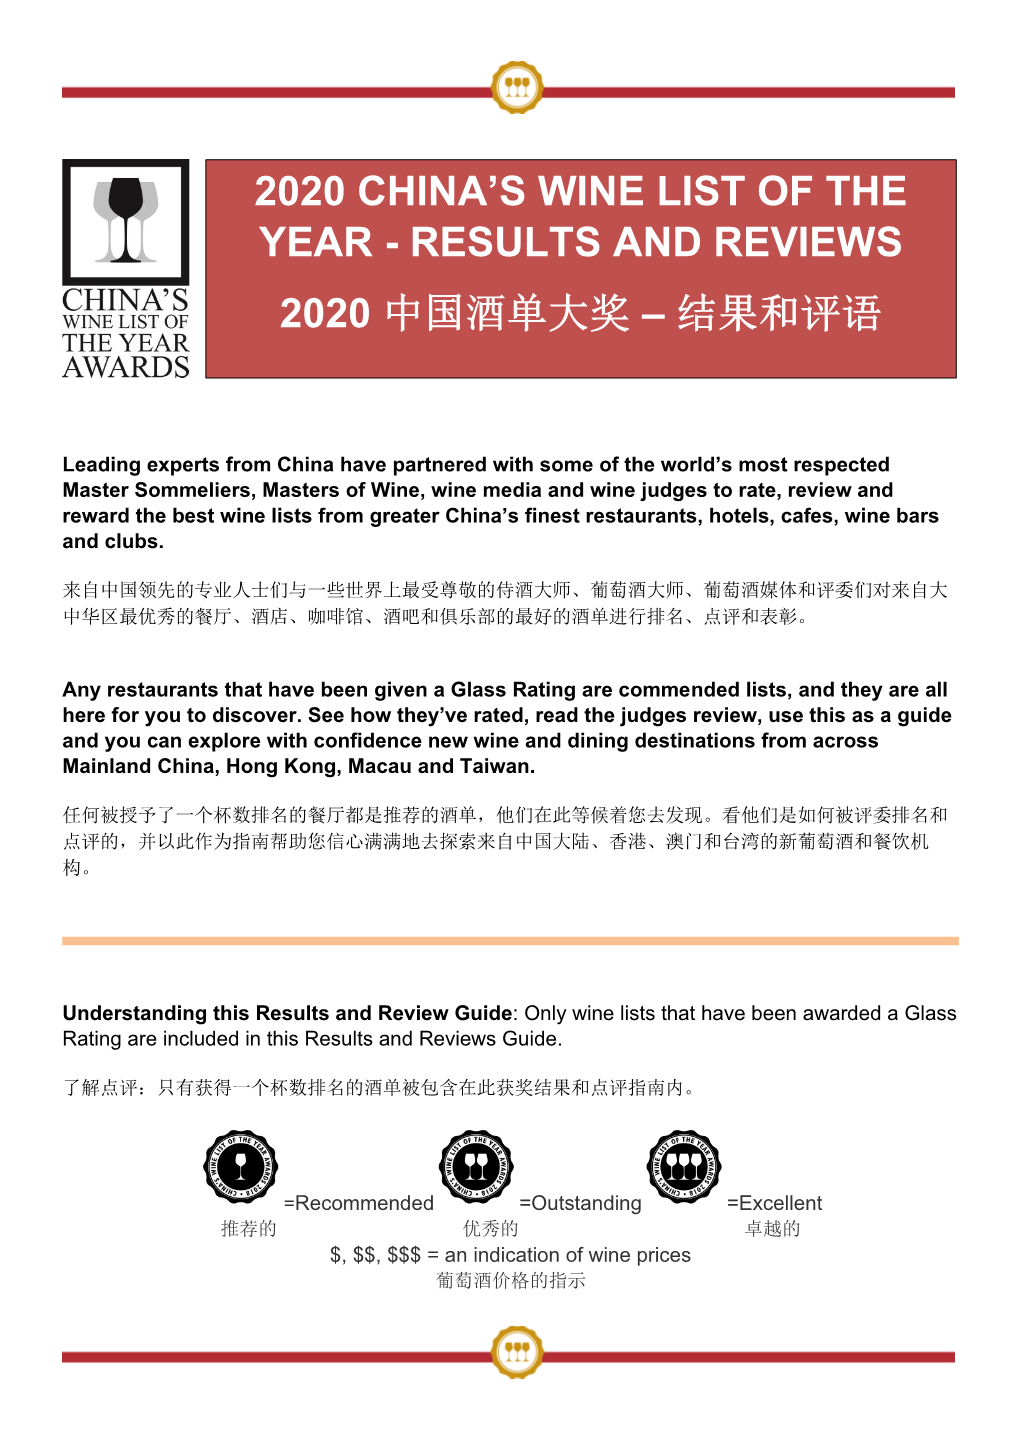 2020 China's Wine List of the Year